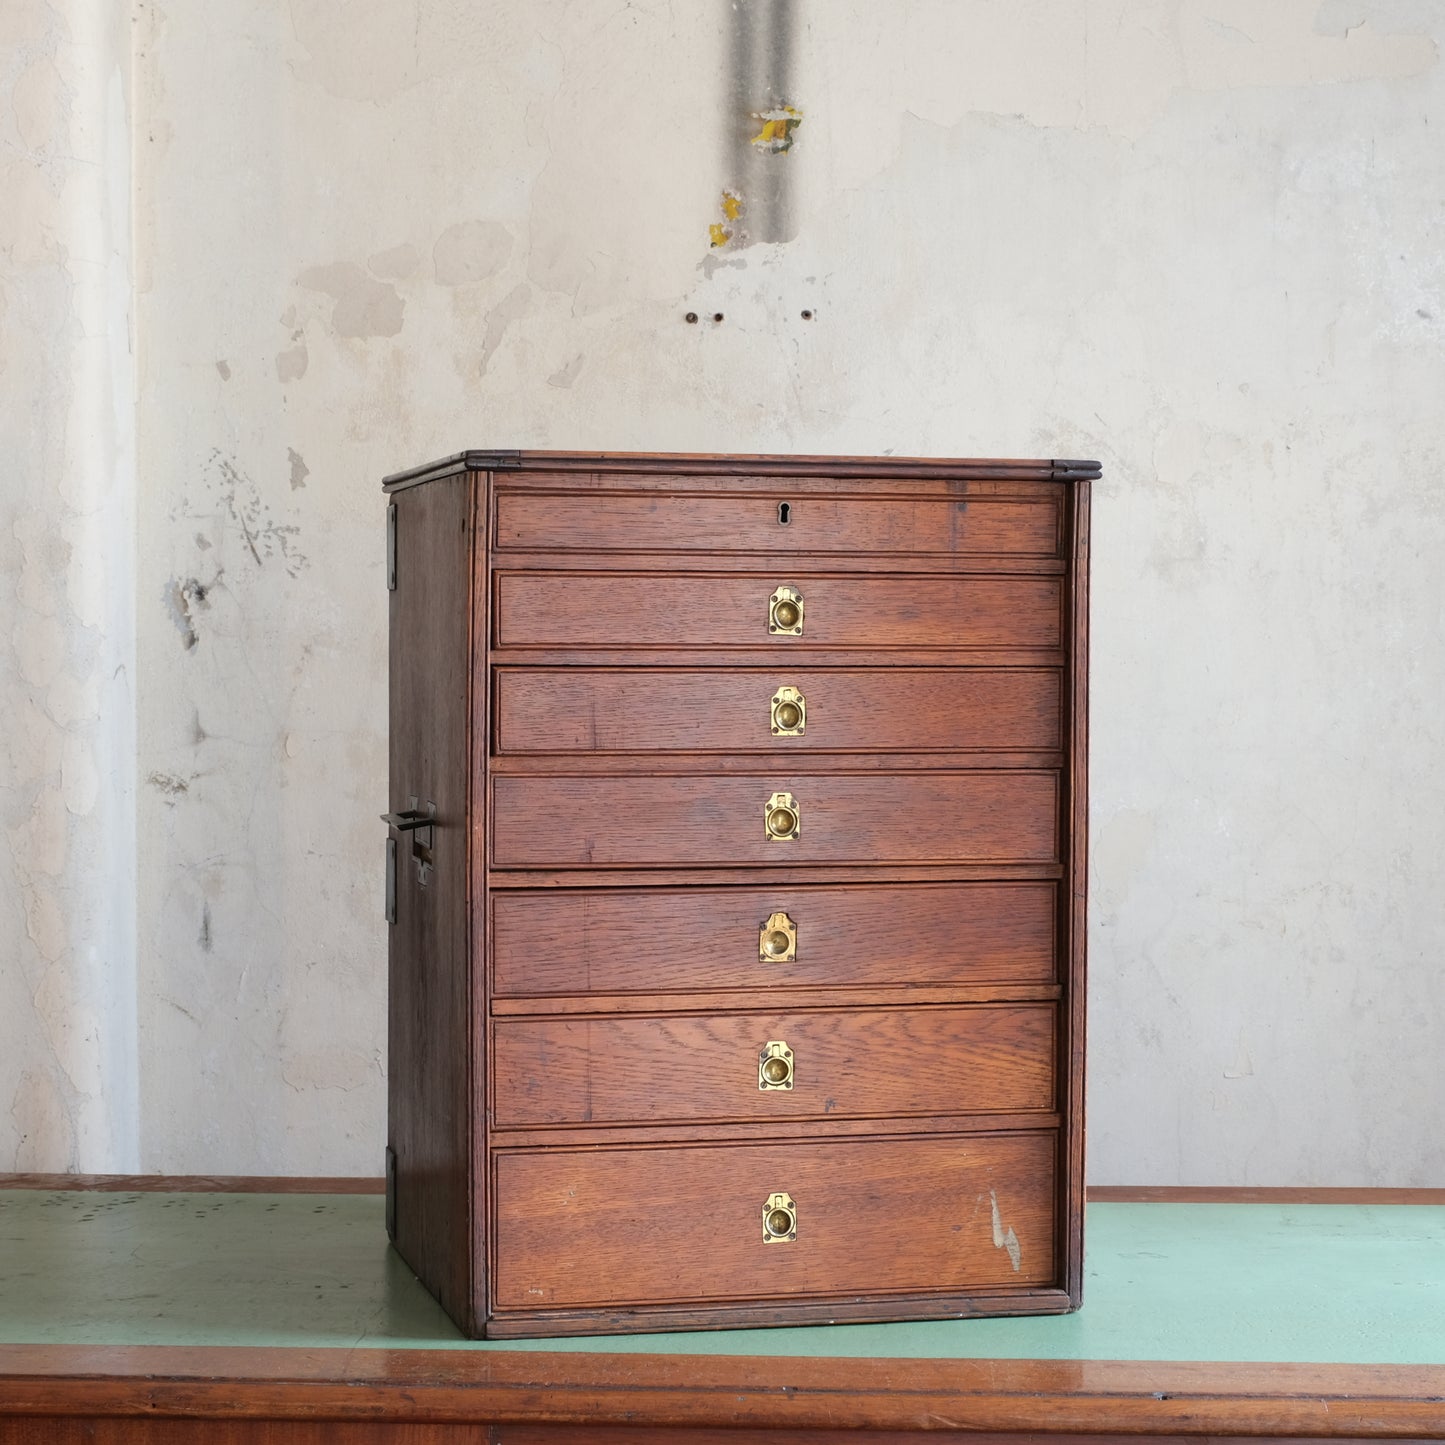 Campaign Furniture - Collectors Specimen Cabinet with Drawers